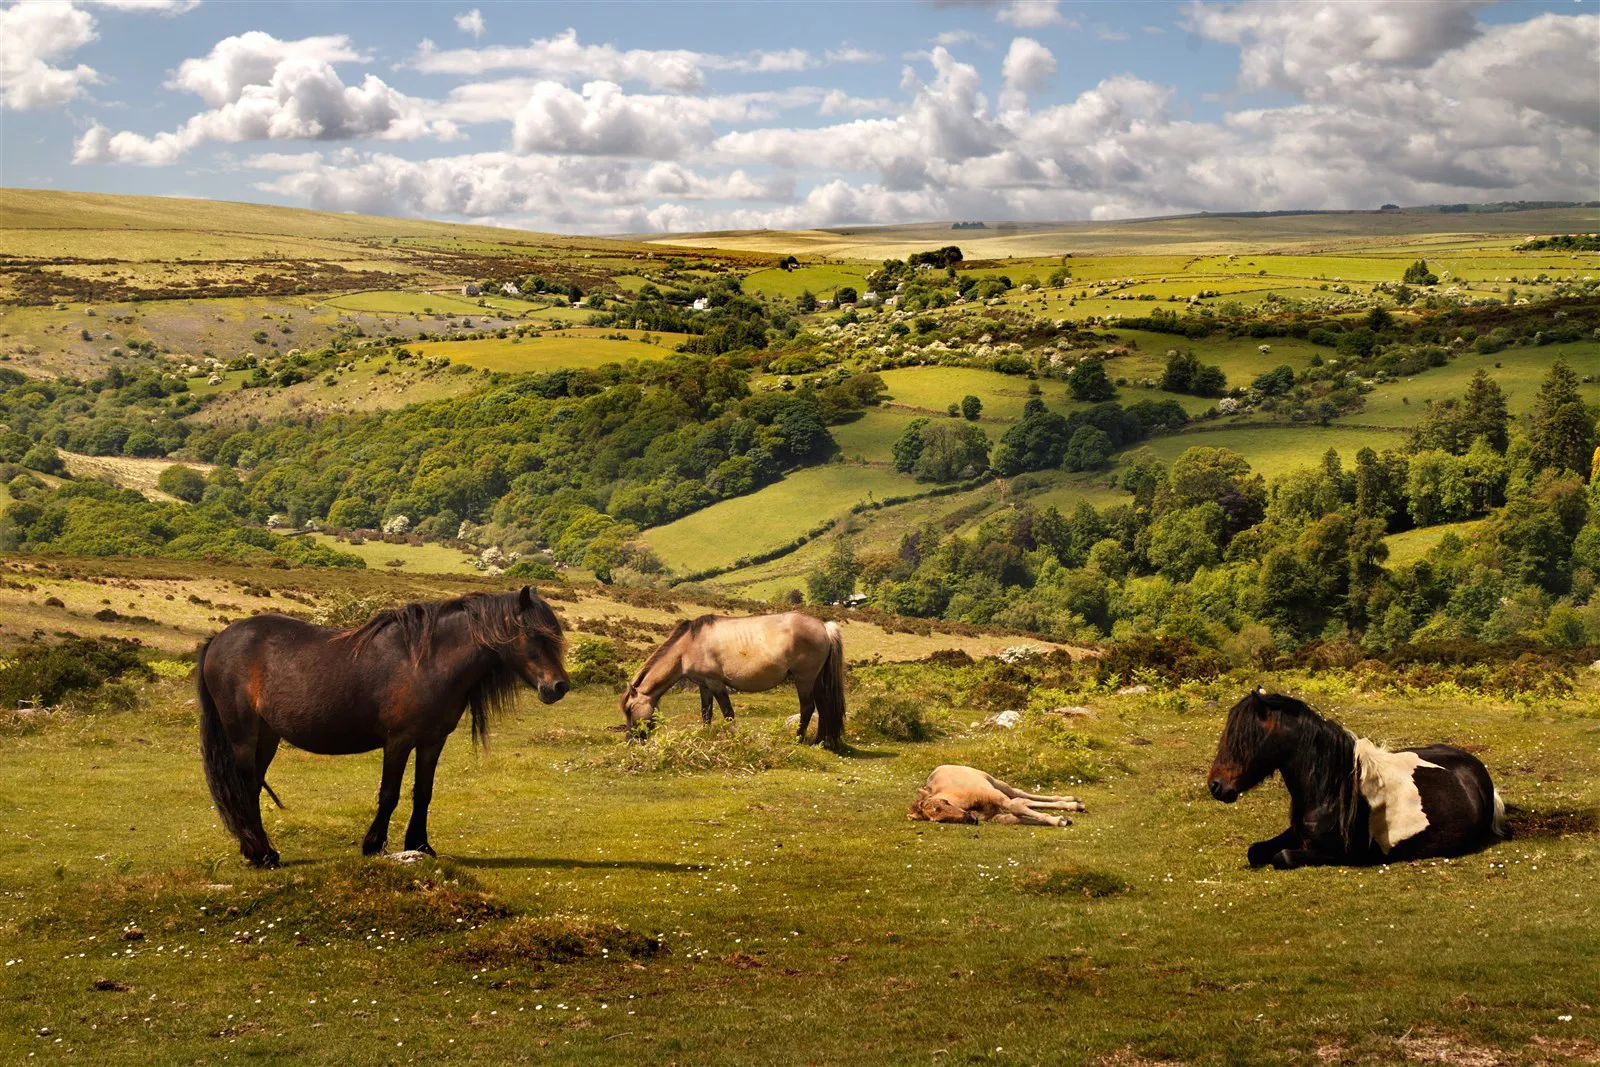 Exmoor ponies roam the national park freely although they are not technically wild